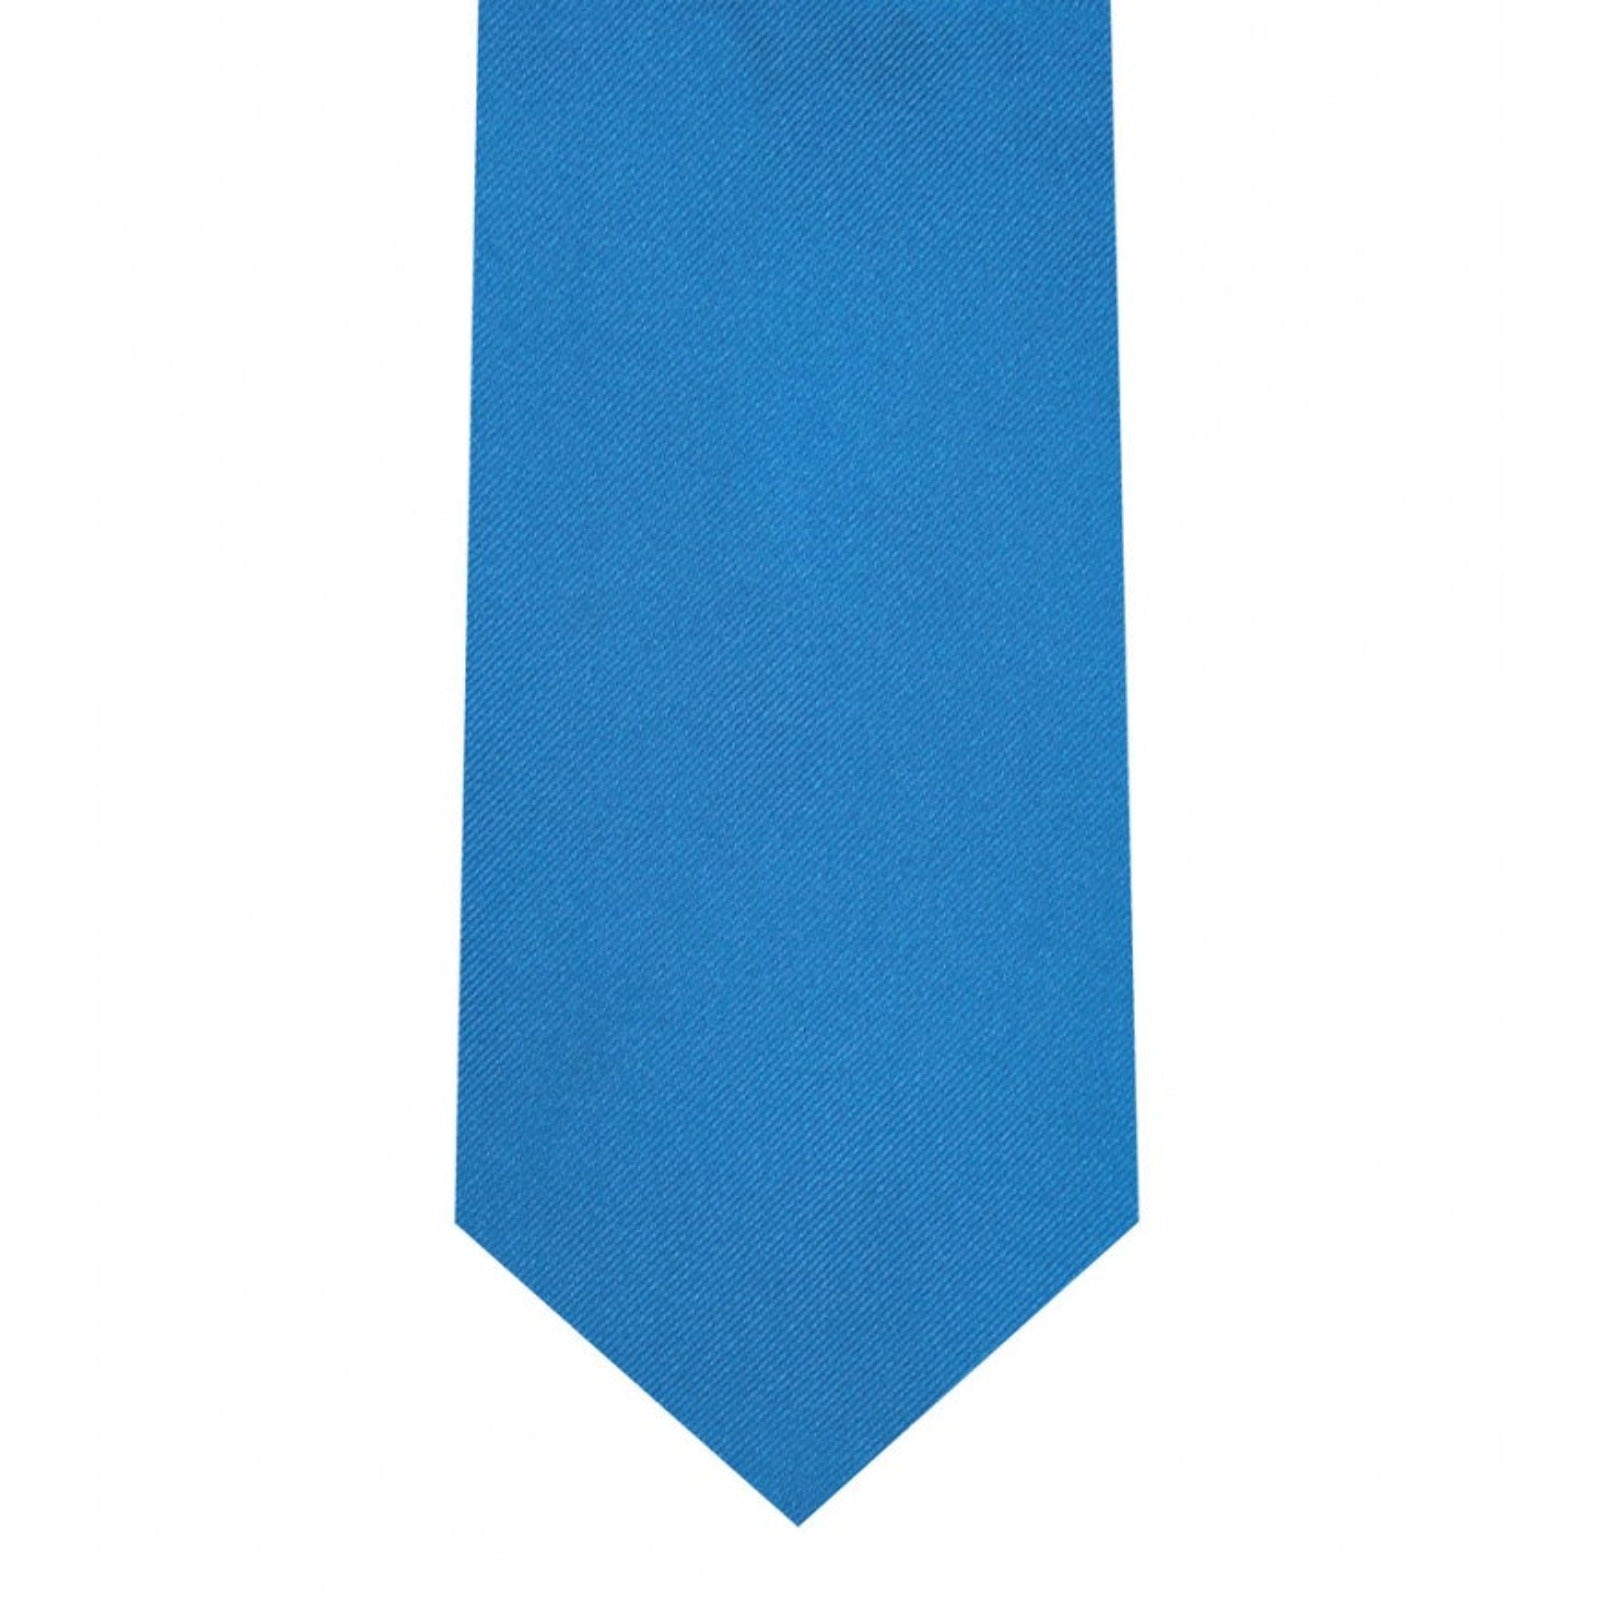 Classic French Blue Tie Skinny width 2.75 inches With Matching Pocket Square | KCT Menswear 